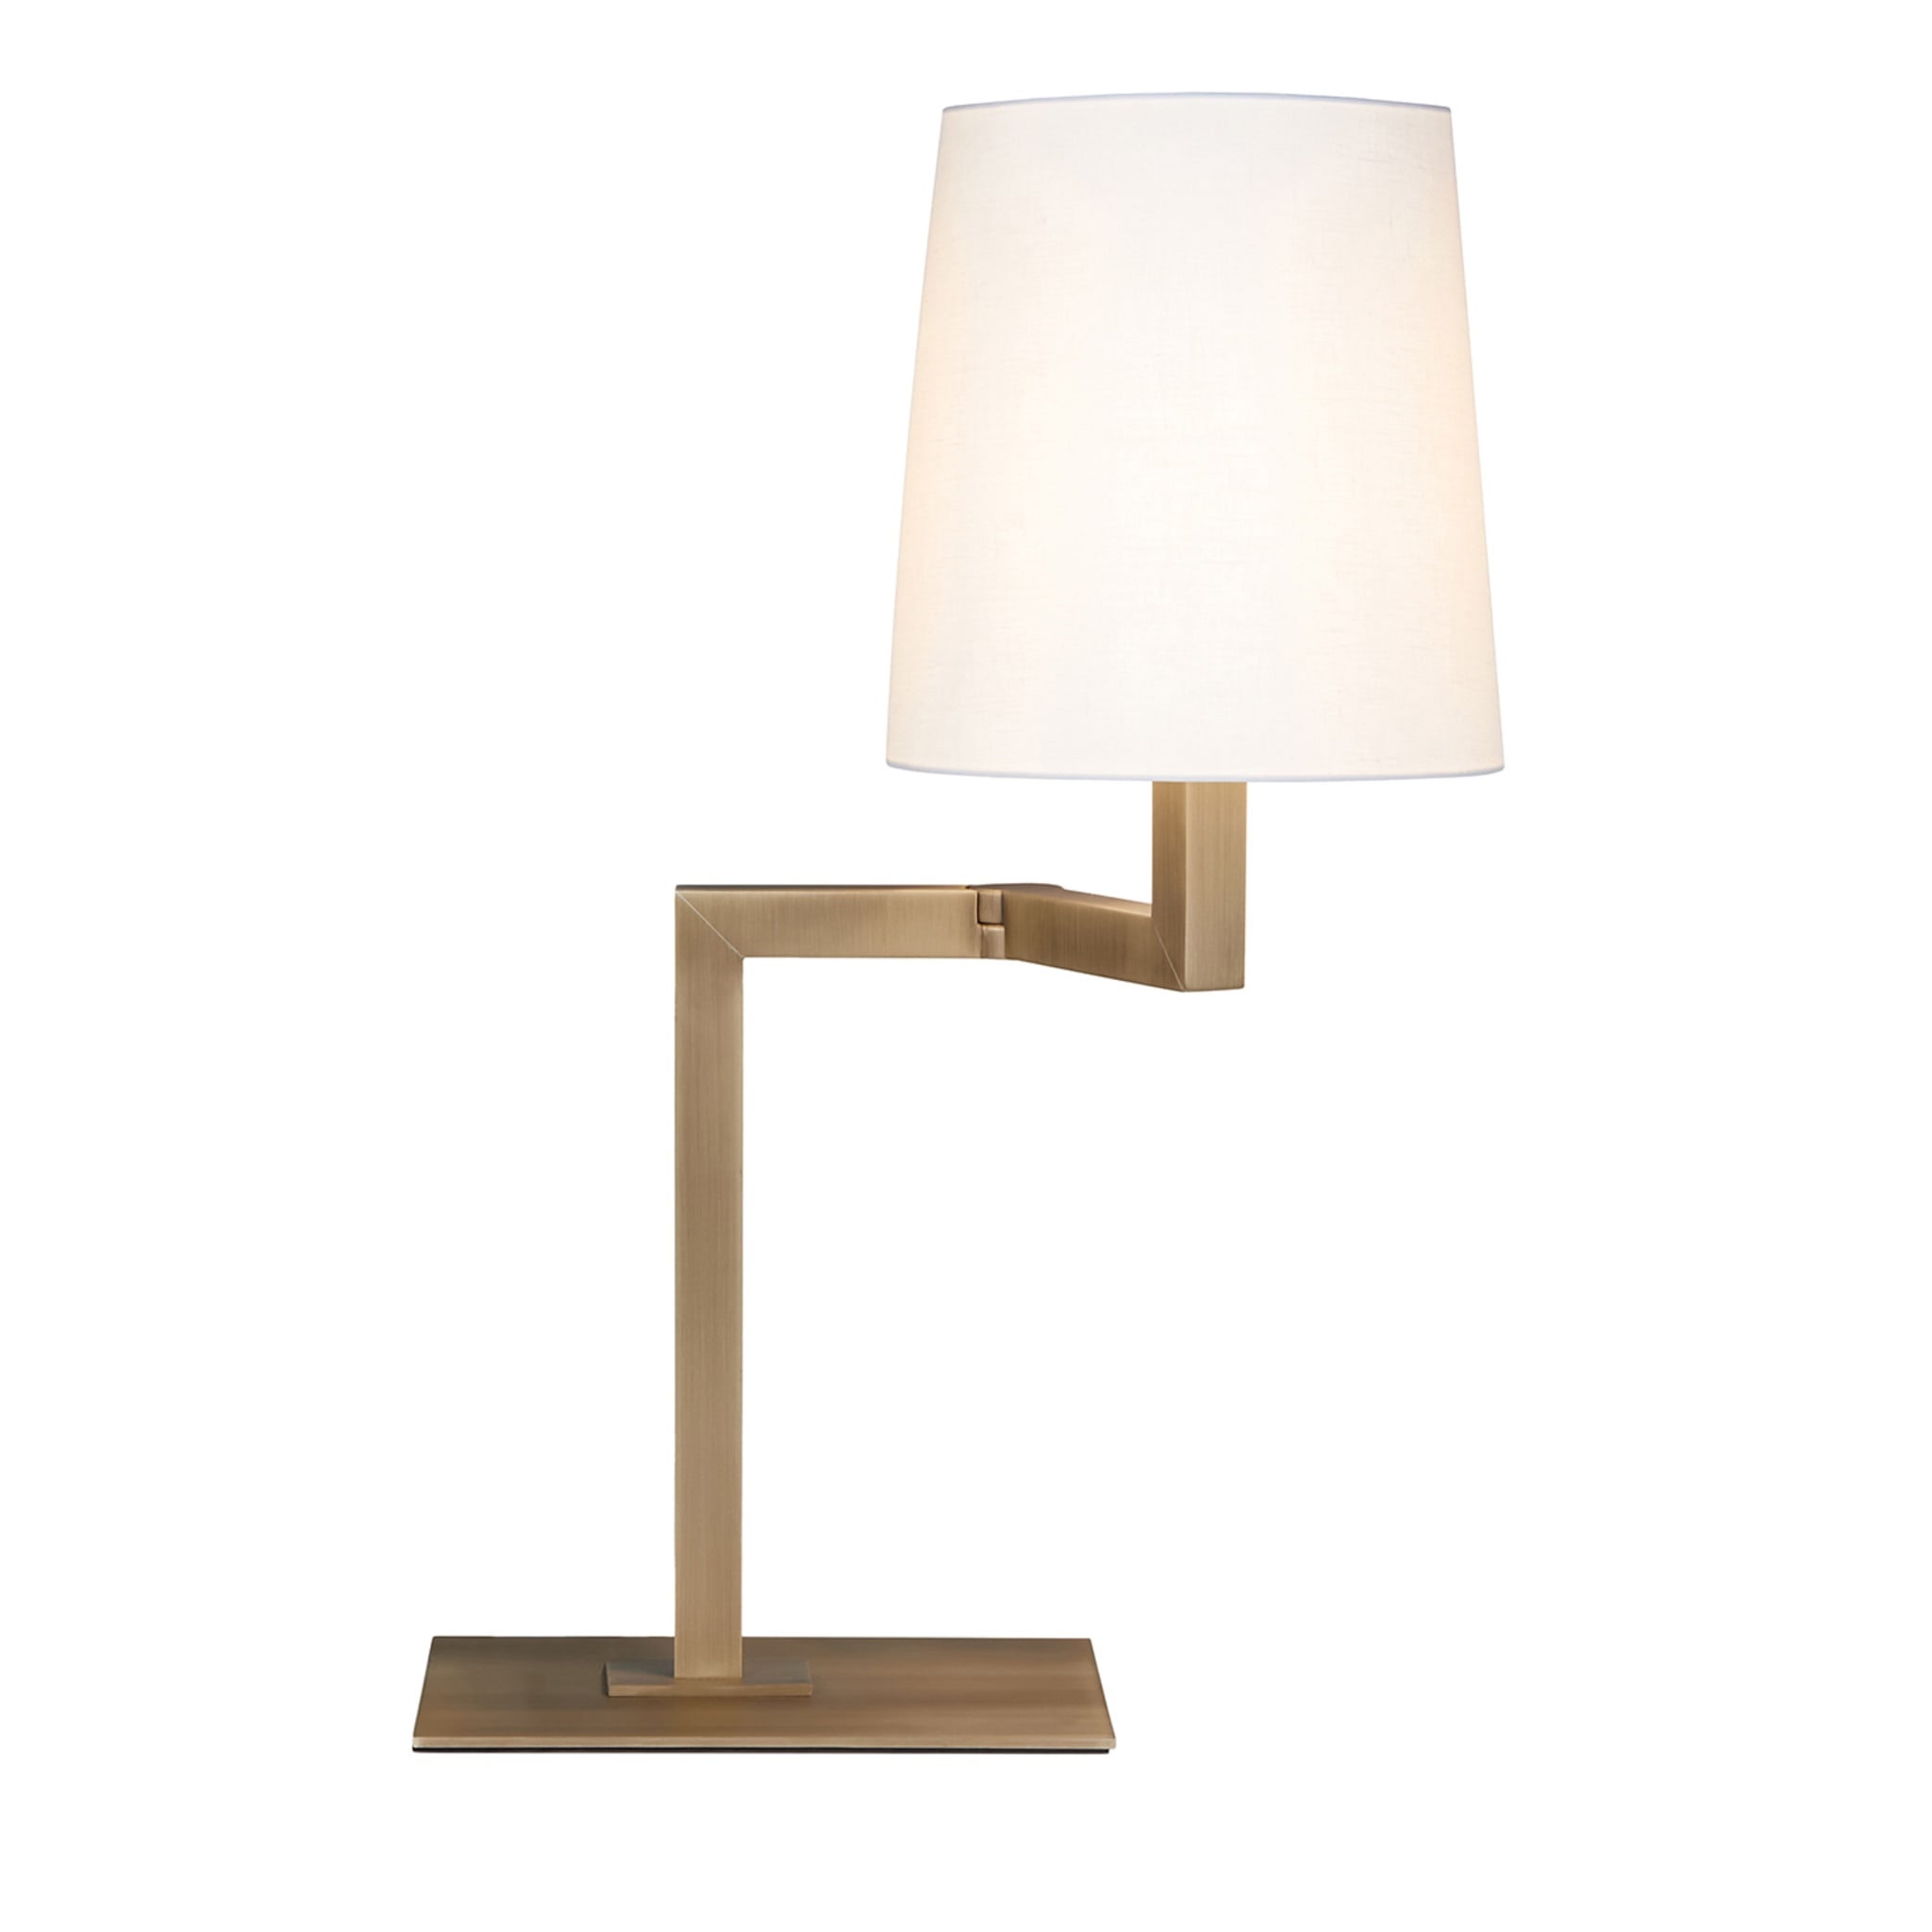 Tonda Bronzed Table Lamp with White Cotton Shade - Main view